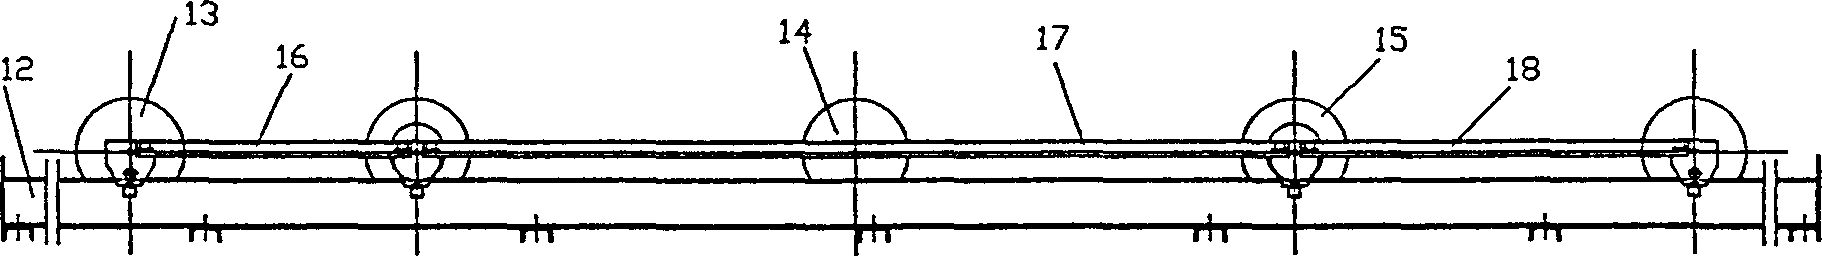 Roller support device or long-distance heavy-load drag chain idle